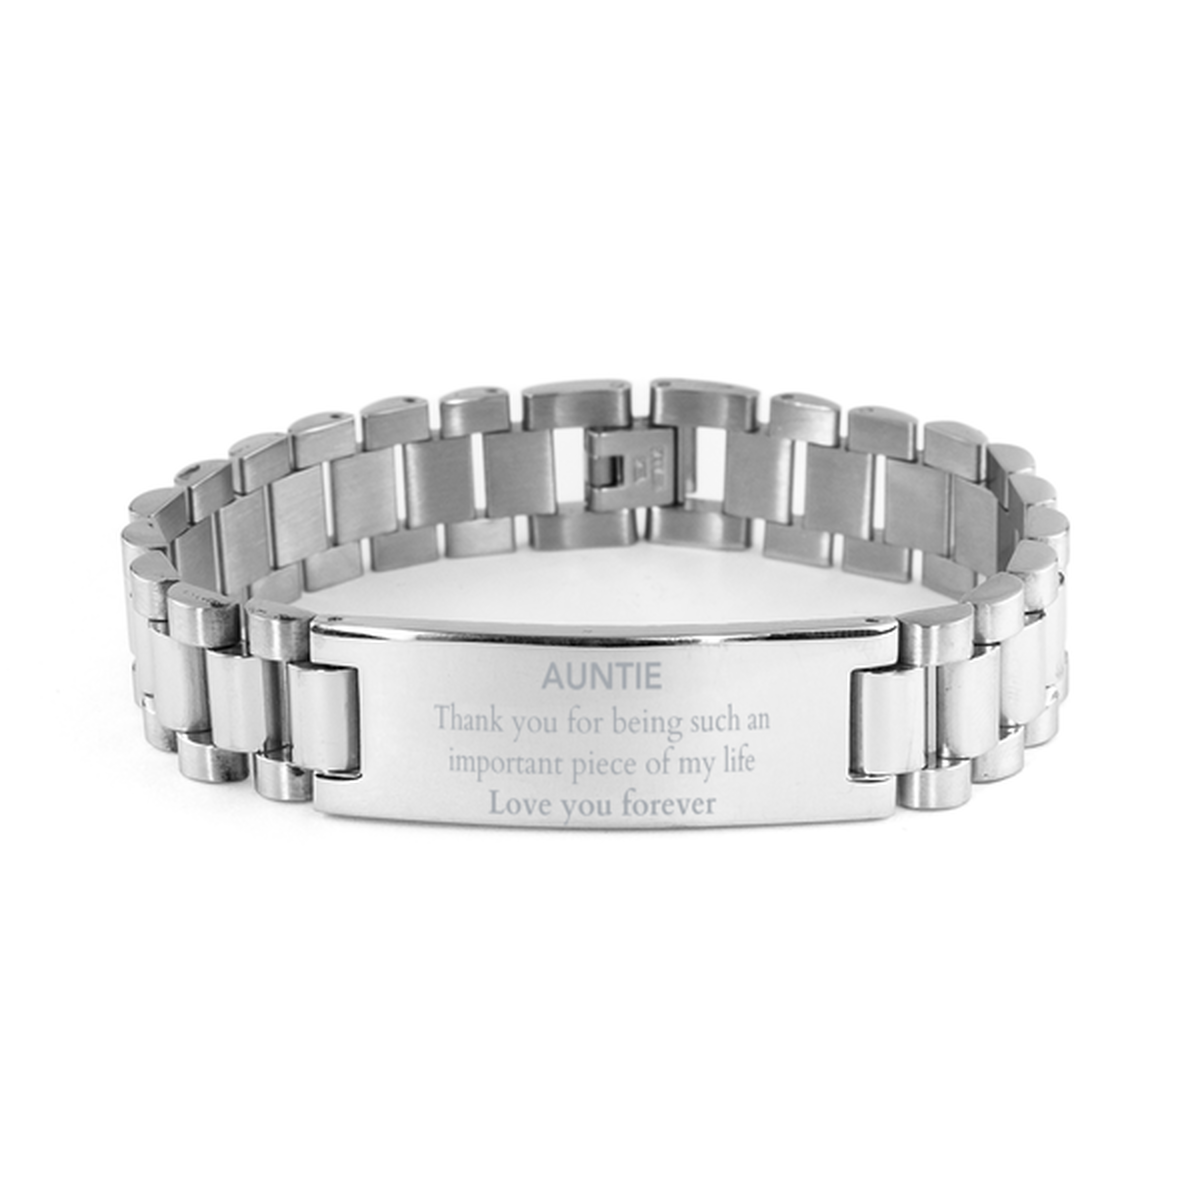 Appropriate Auntie Ladder Stainless Steel Bracelet Epic Birthday Gifts for Auntie Thank you for being such an important piece of my life Auntie Christmas Mothers Fathers Day